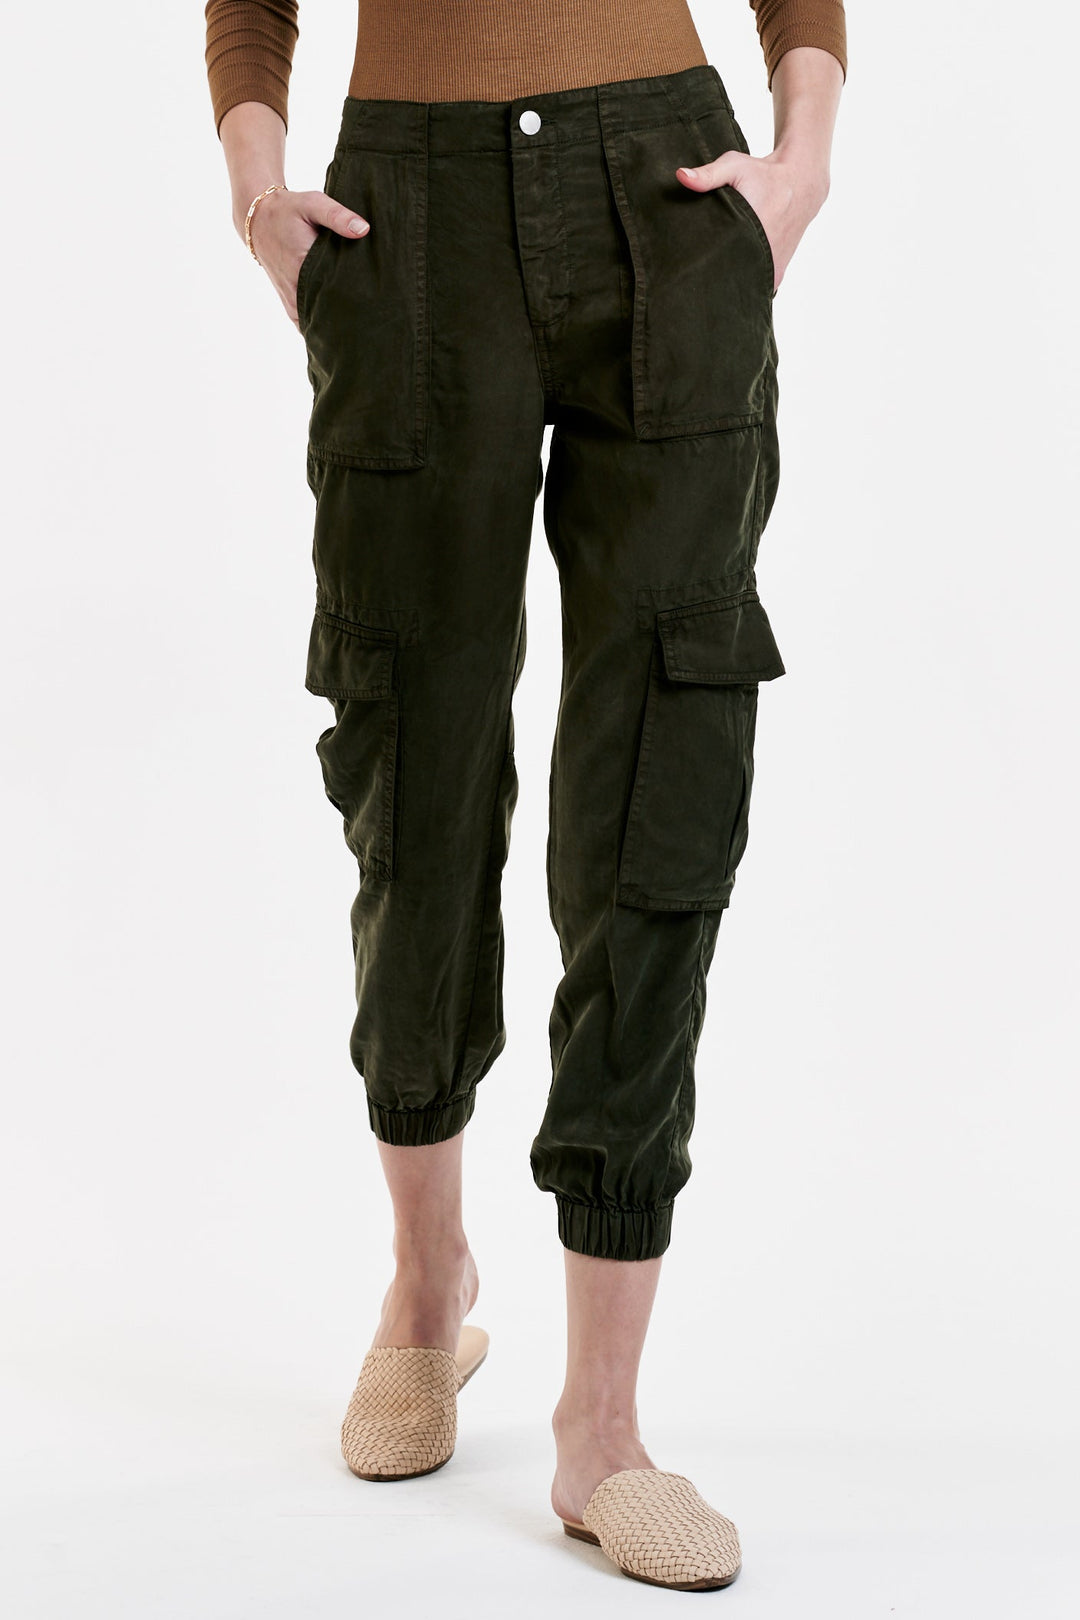 sandy-super-high-rise-ankle-trouser-pants-olive